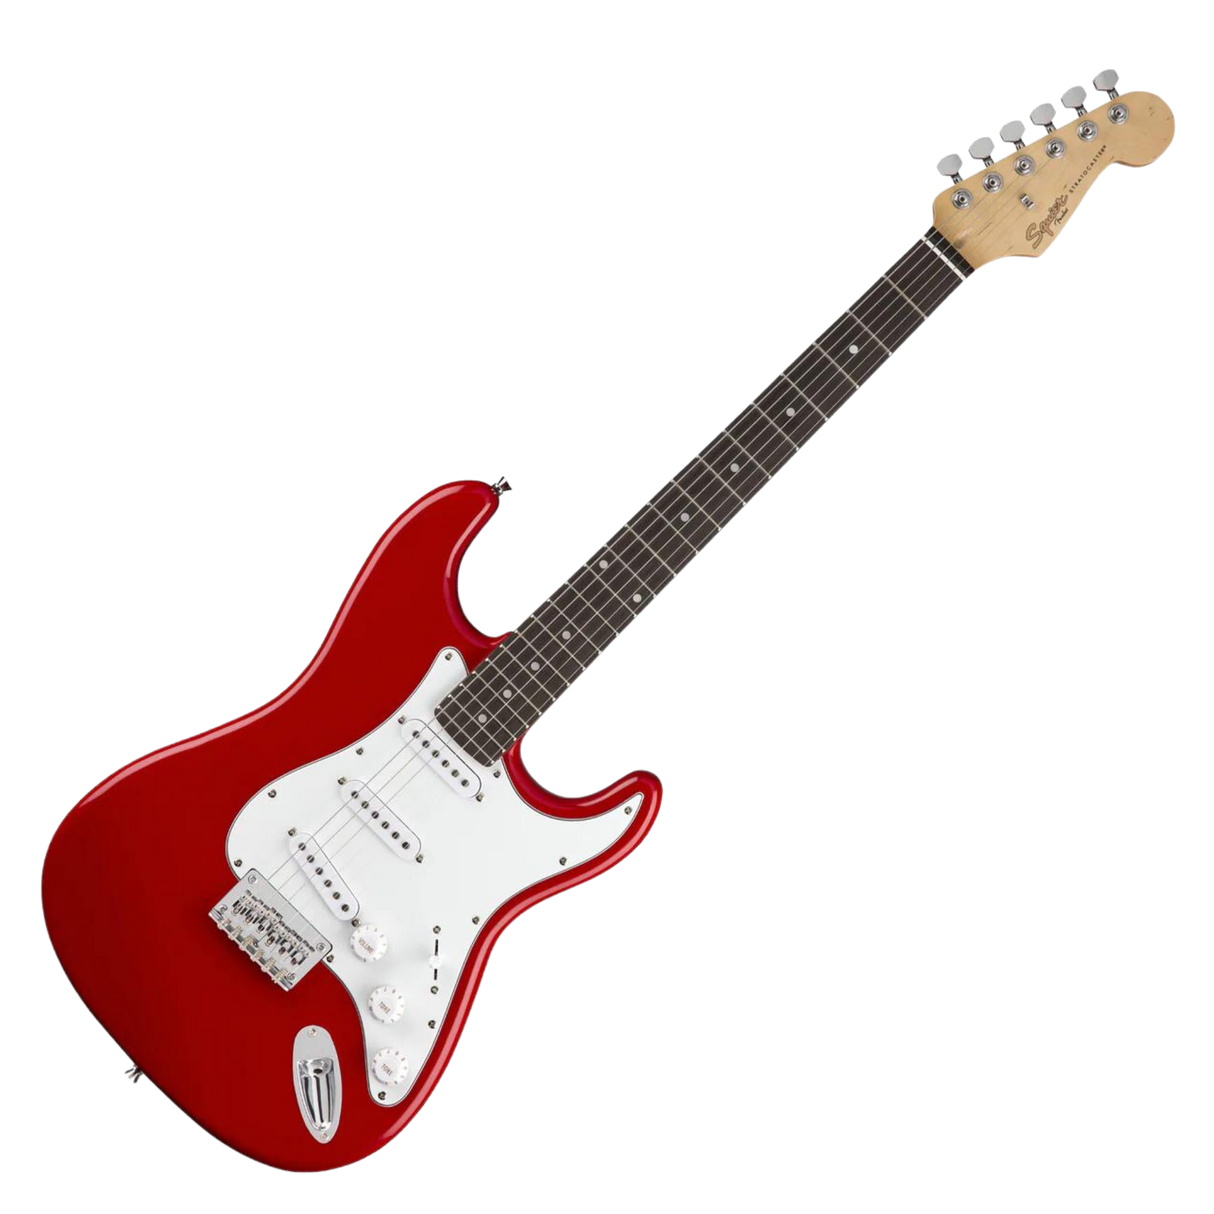 Squier Stratocaster Hard Tail Solidbody Electric Guitar